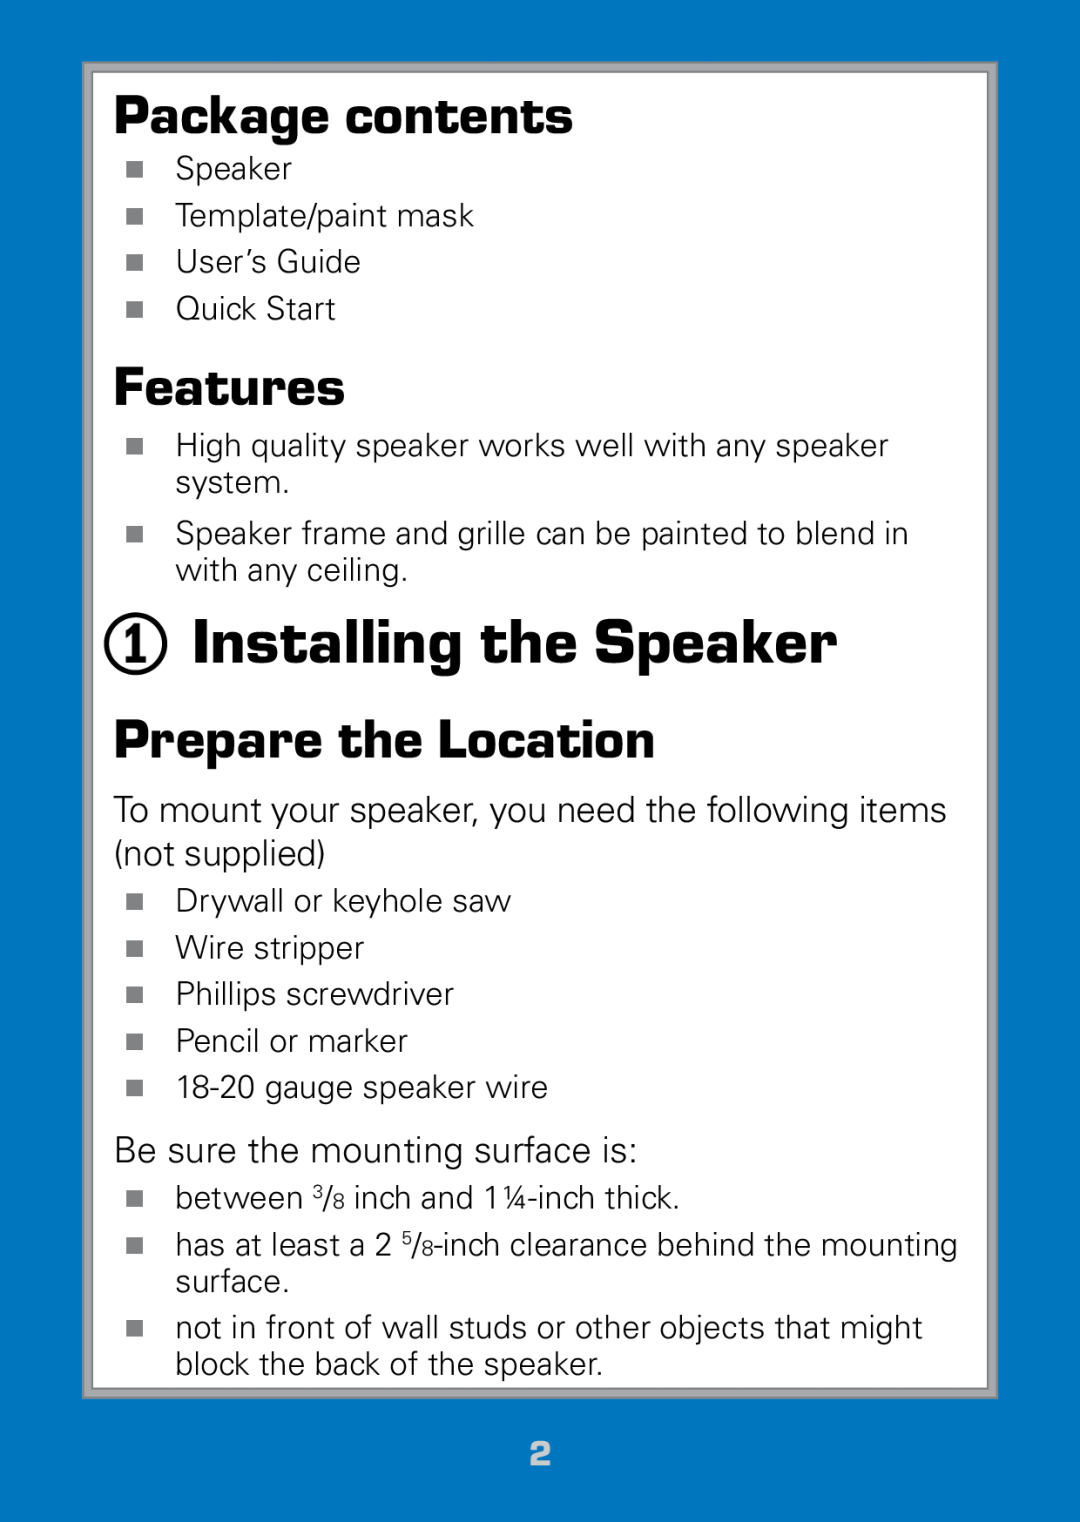 Radio Shack 40-289 manual 1Installing the Speaker, Package contents, Features, Prepare the Location 